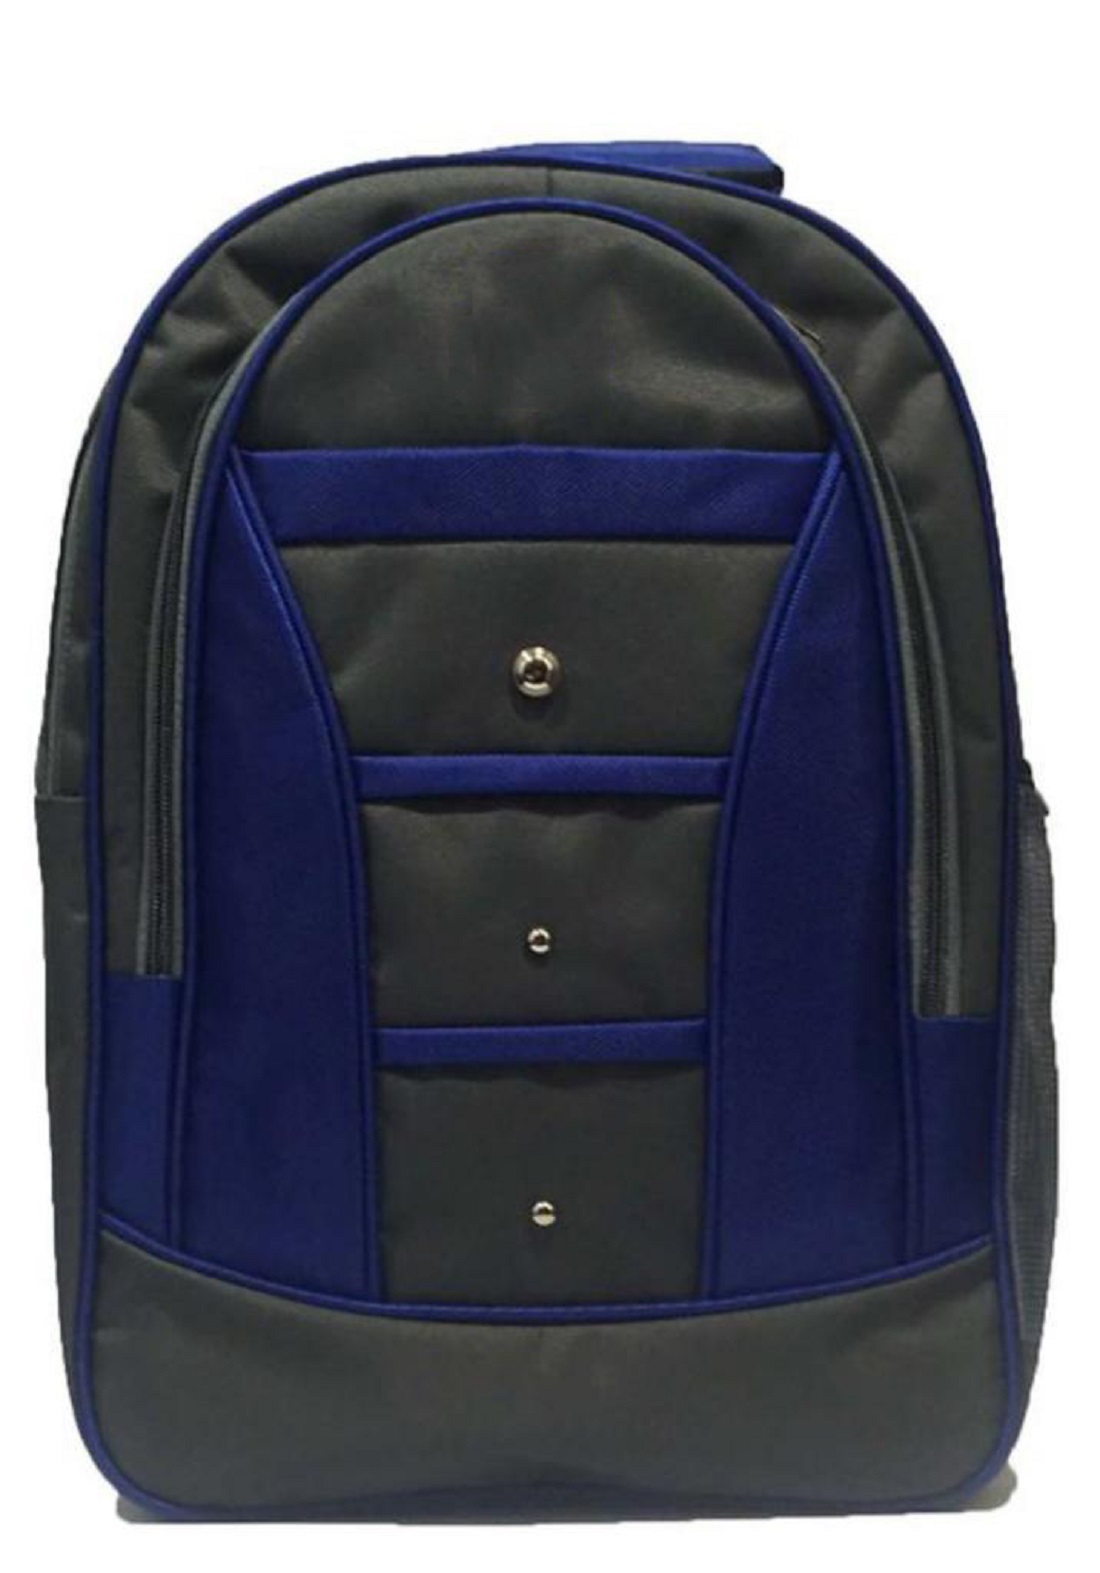 Buy Proera Blue Polyester 25 Ltrs College Backpack Office Bags Shoulder ...